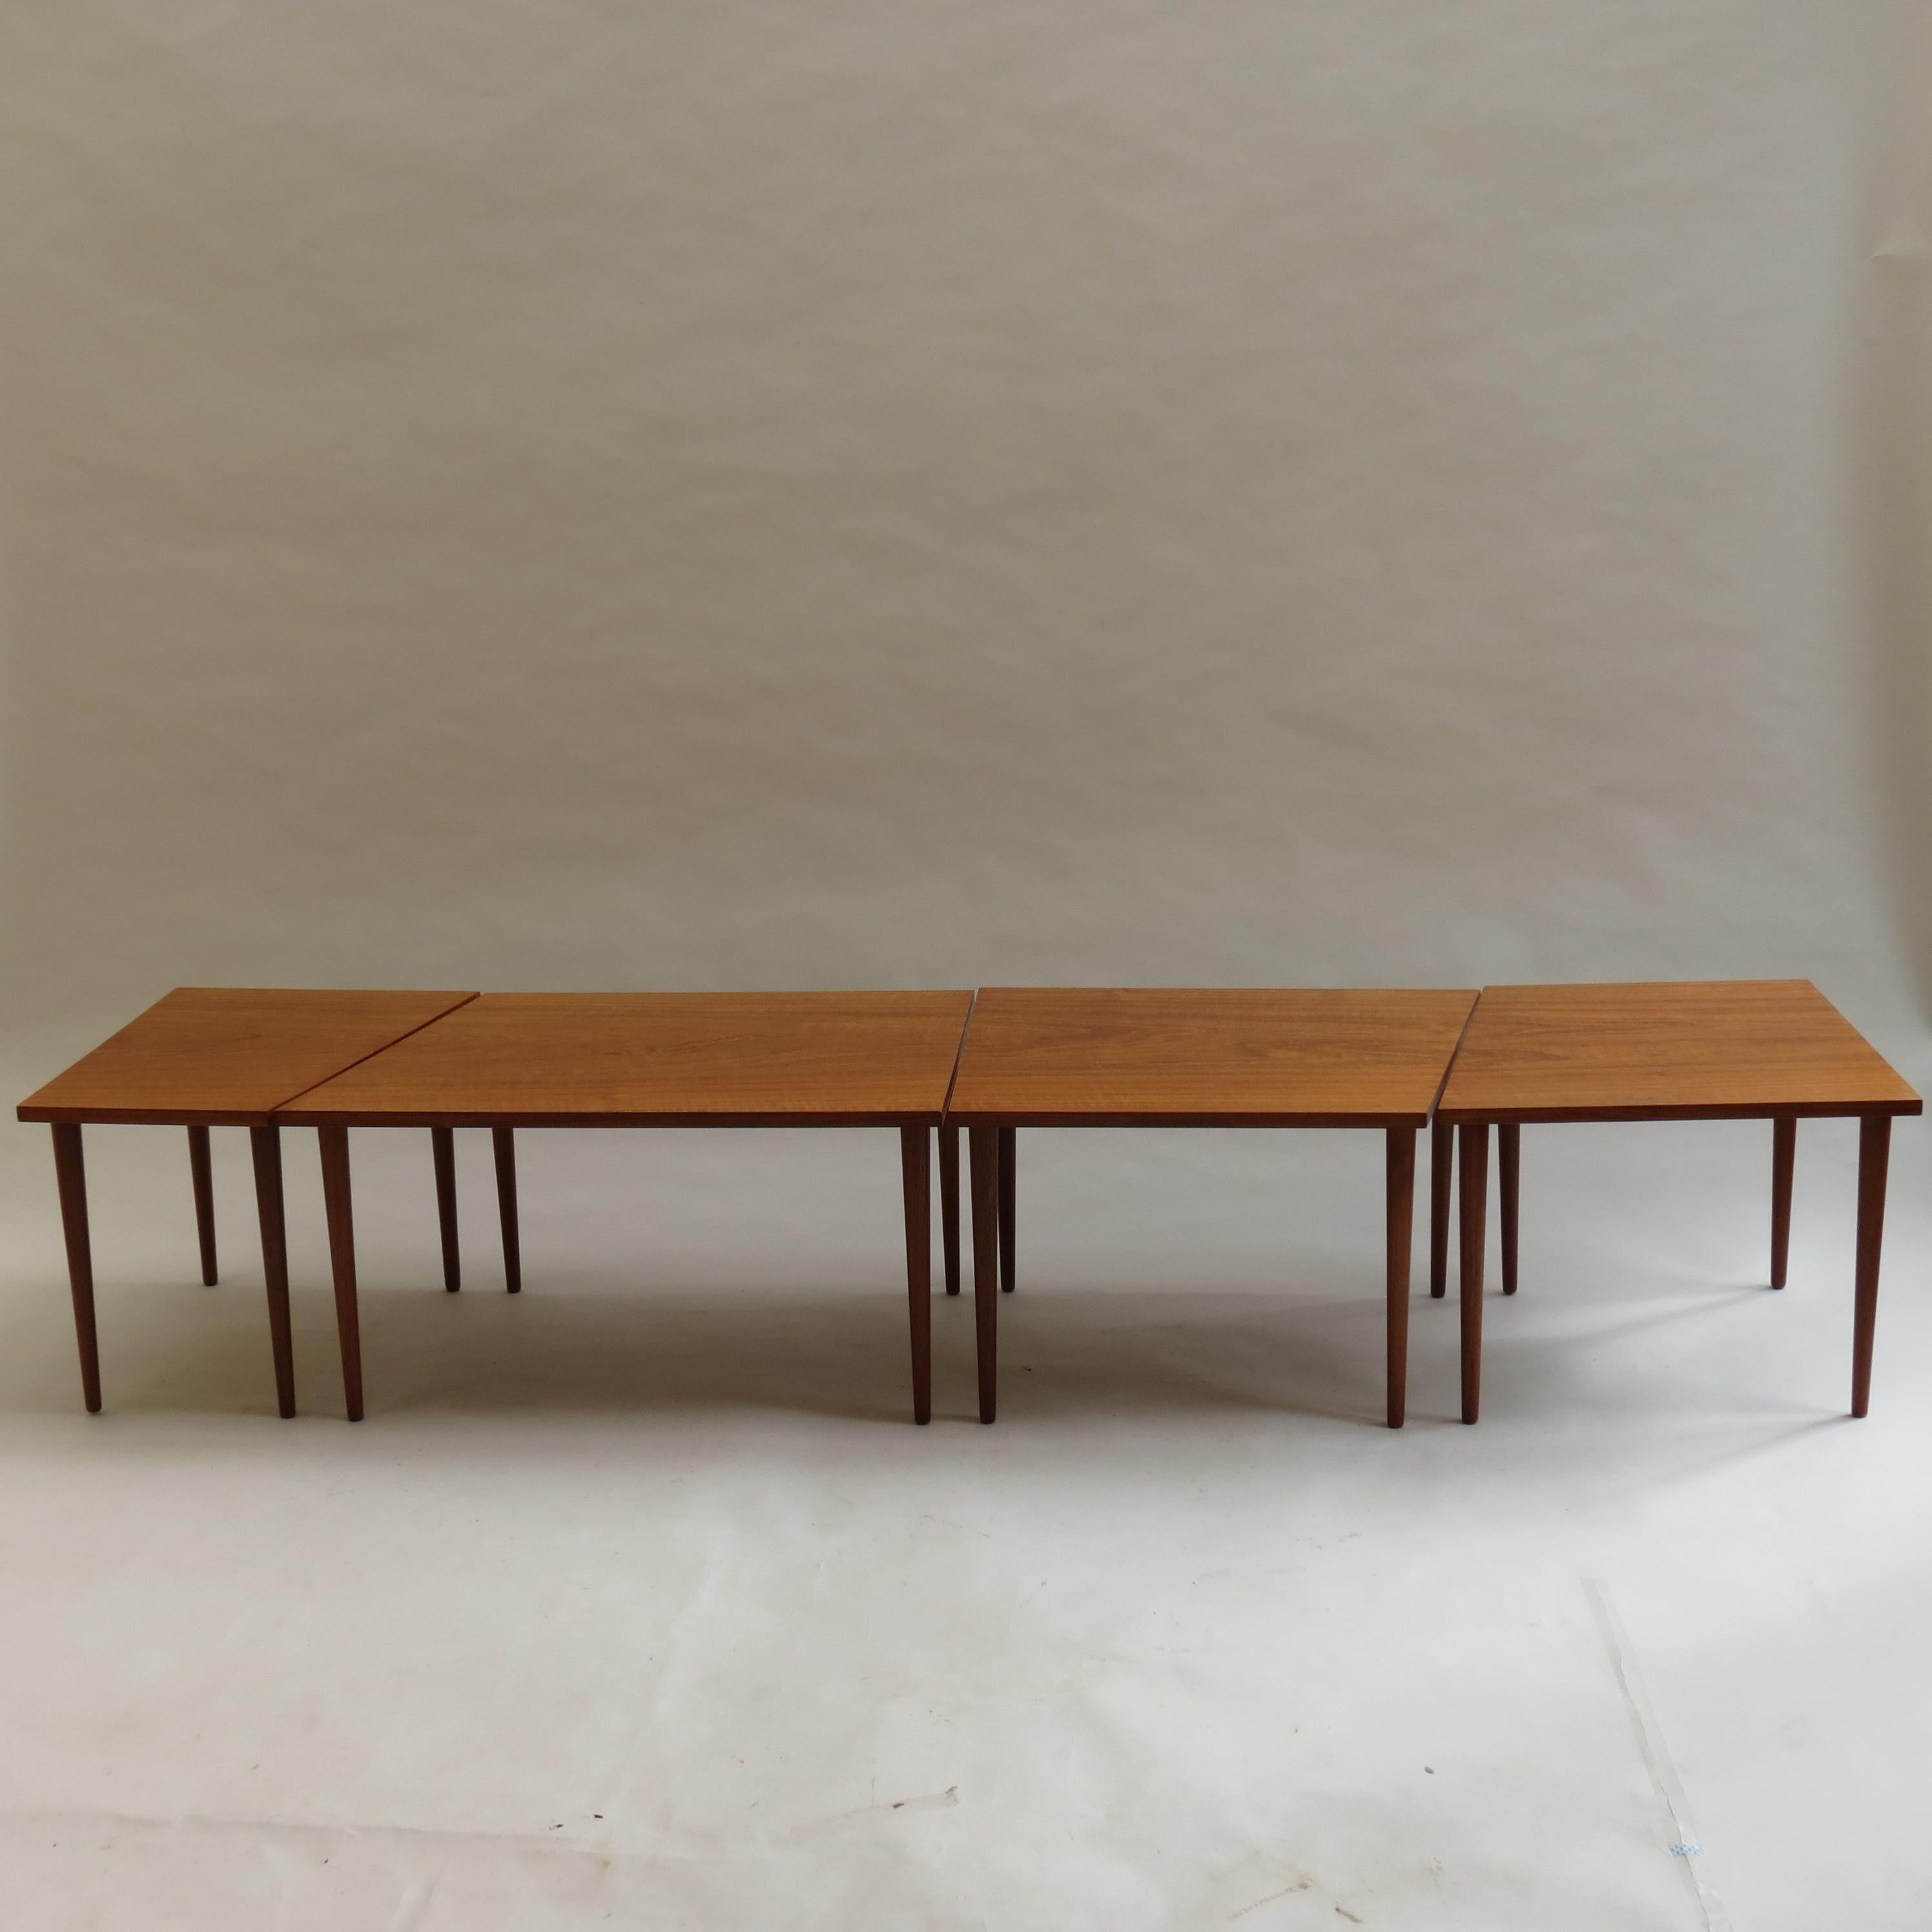 A very good quality teak coffee table, comprises 4 separate tables that sit together to form a long coffee table. Can also be placed in many configurations. Could be set up as a coffee table and 2 side tables, set up in an L shape to sit with a